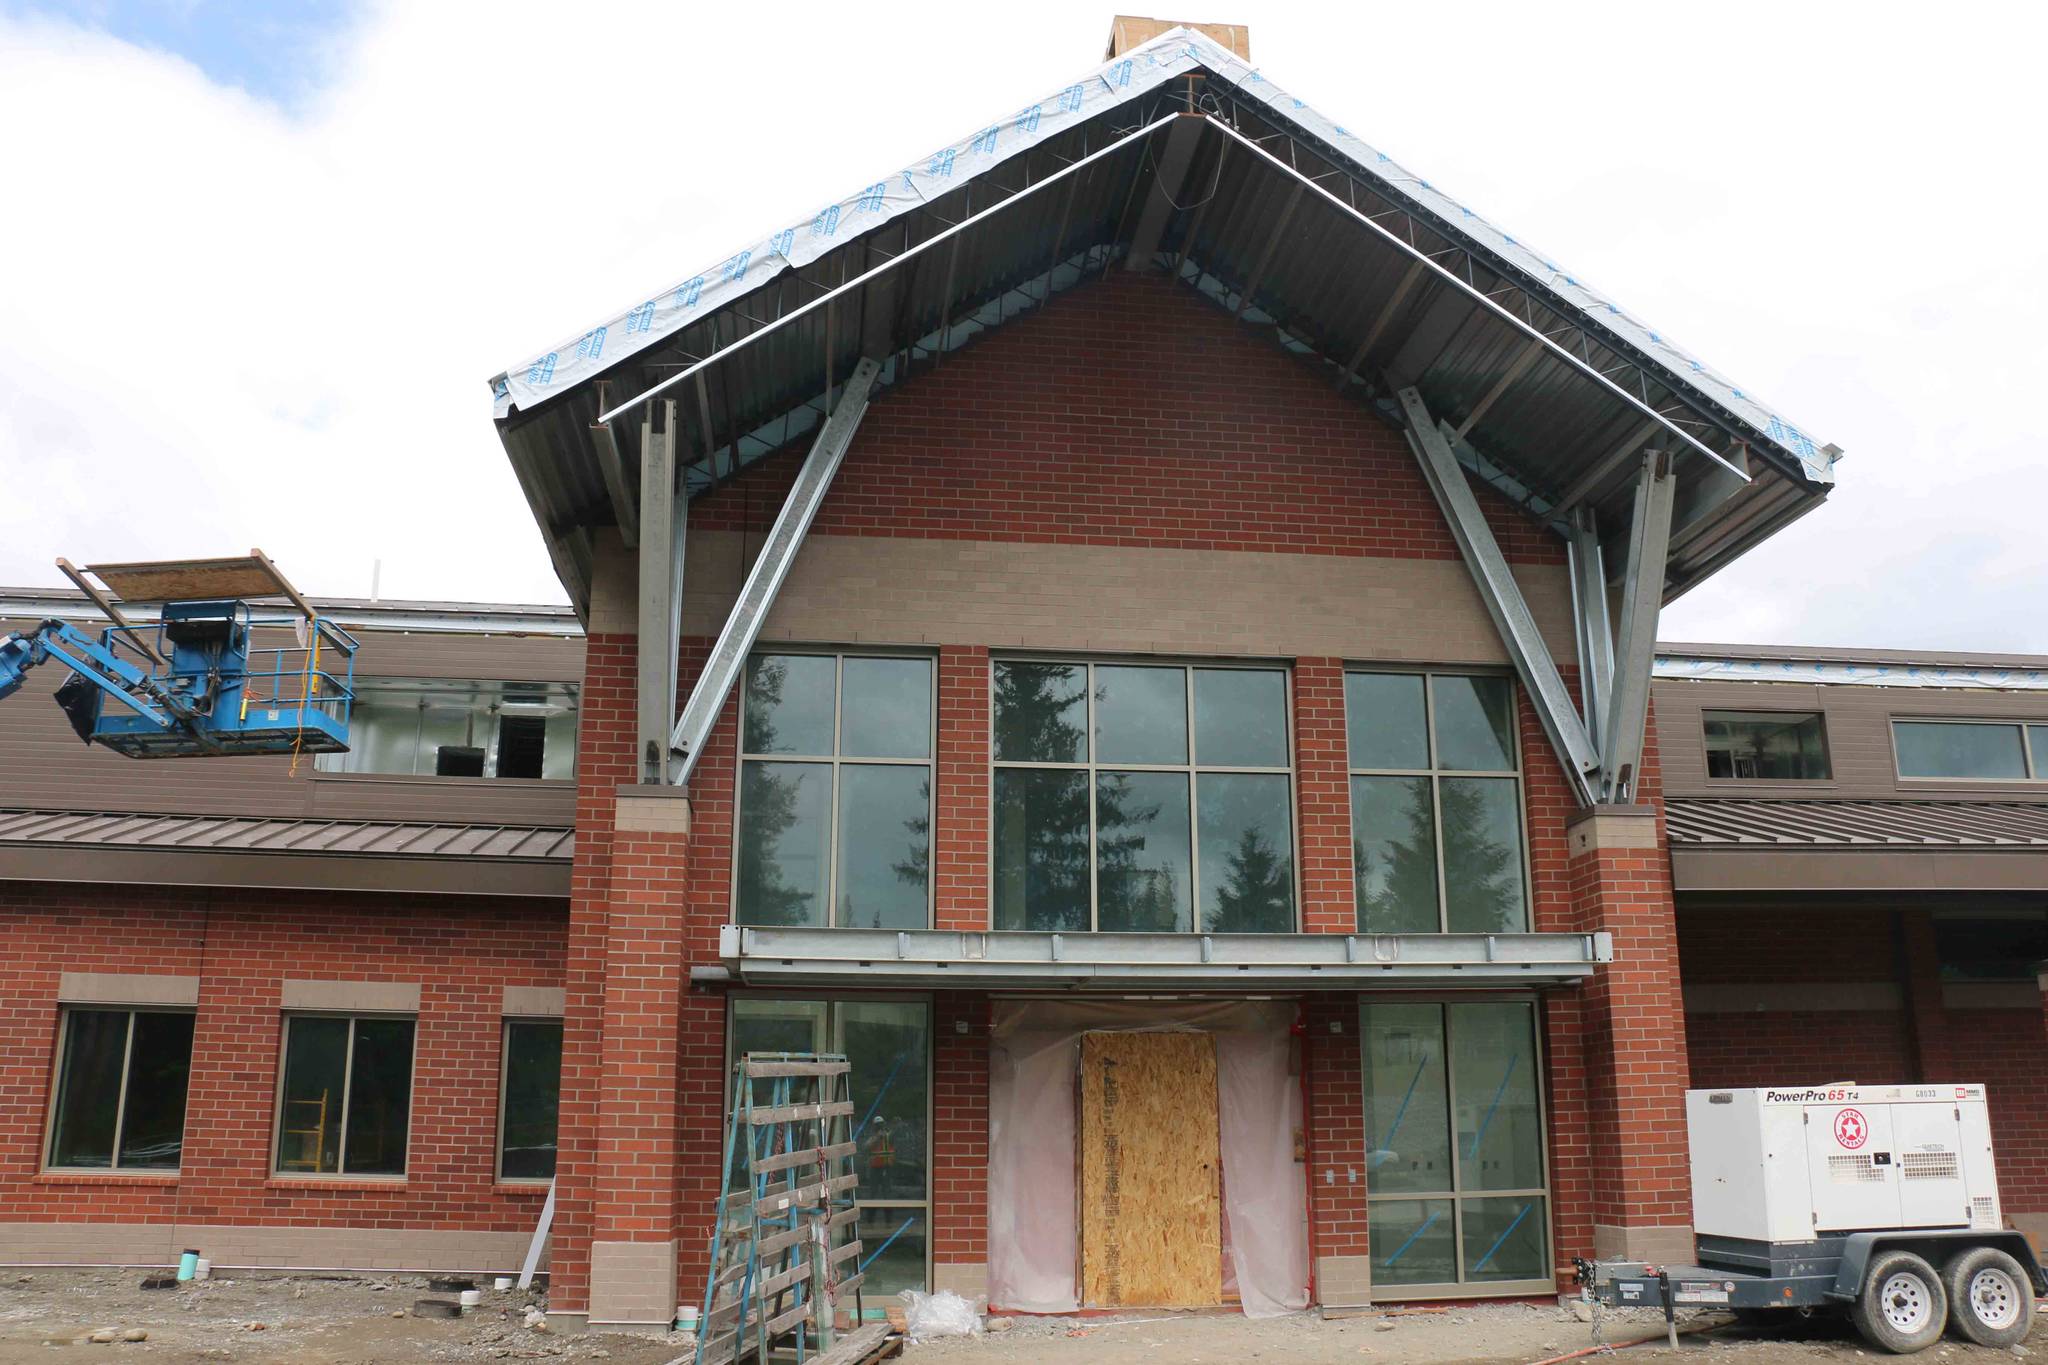 The main entrance of Bowman Creek elementary school, under construction in May. Courtesy photo